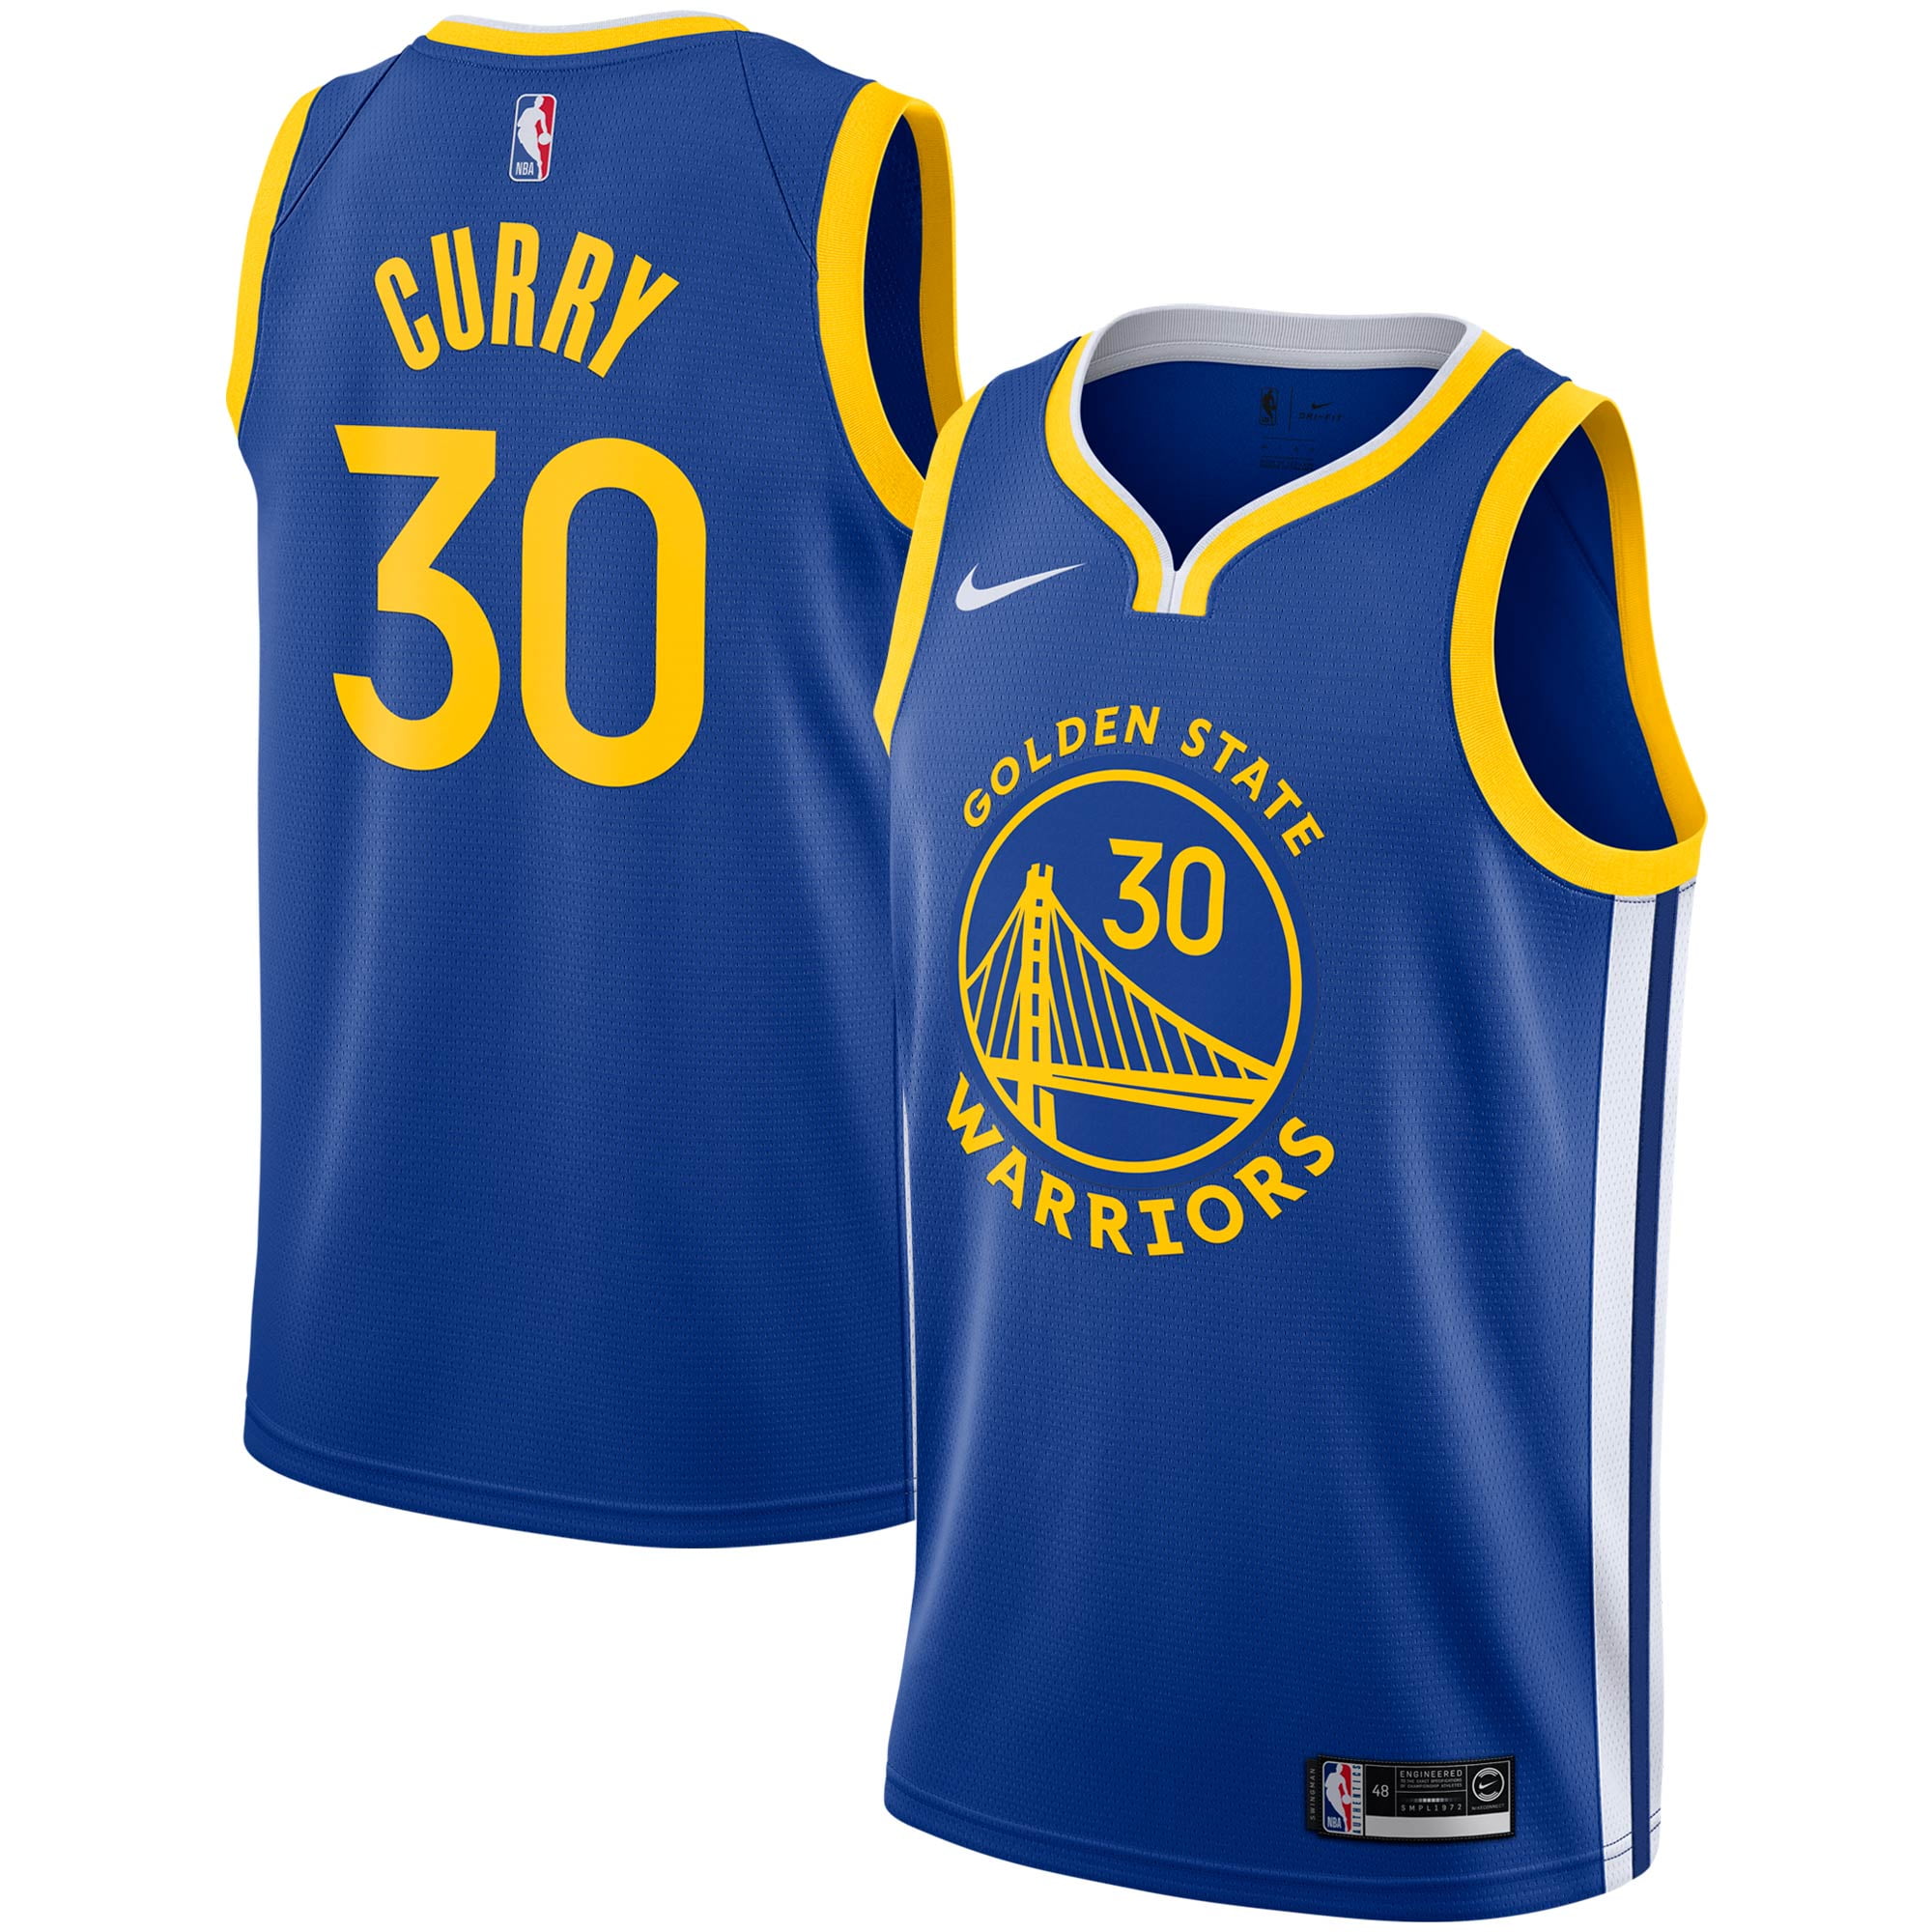 how much is a steph curry jersey